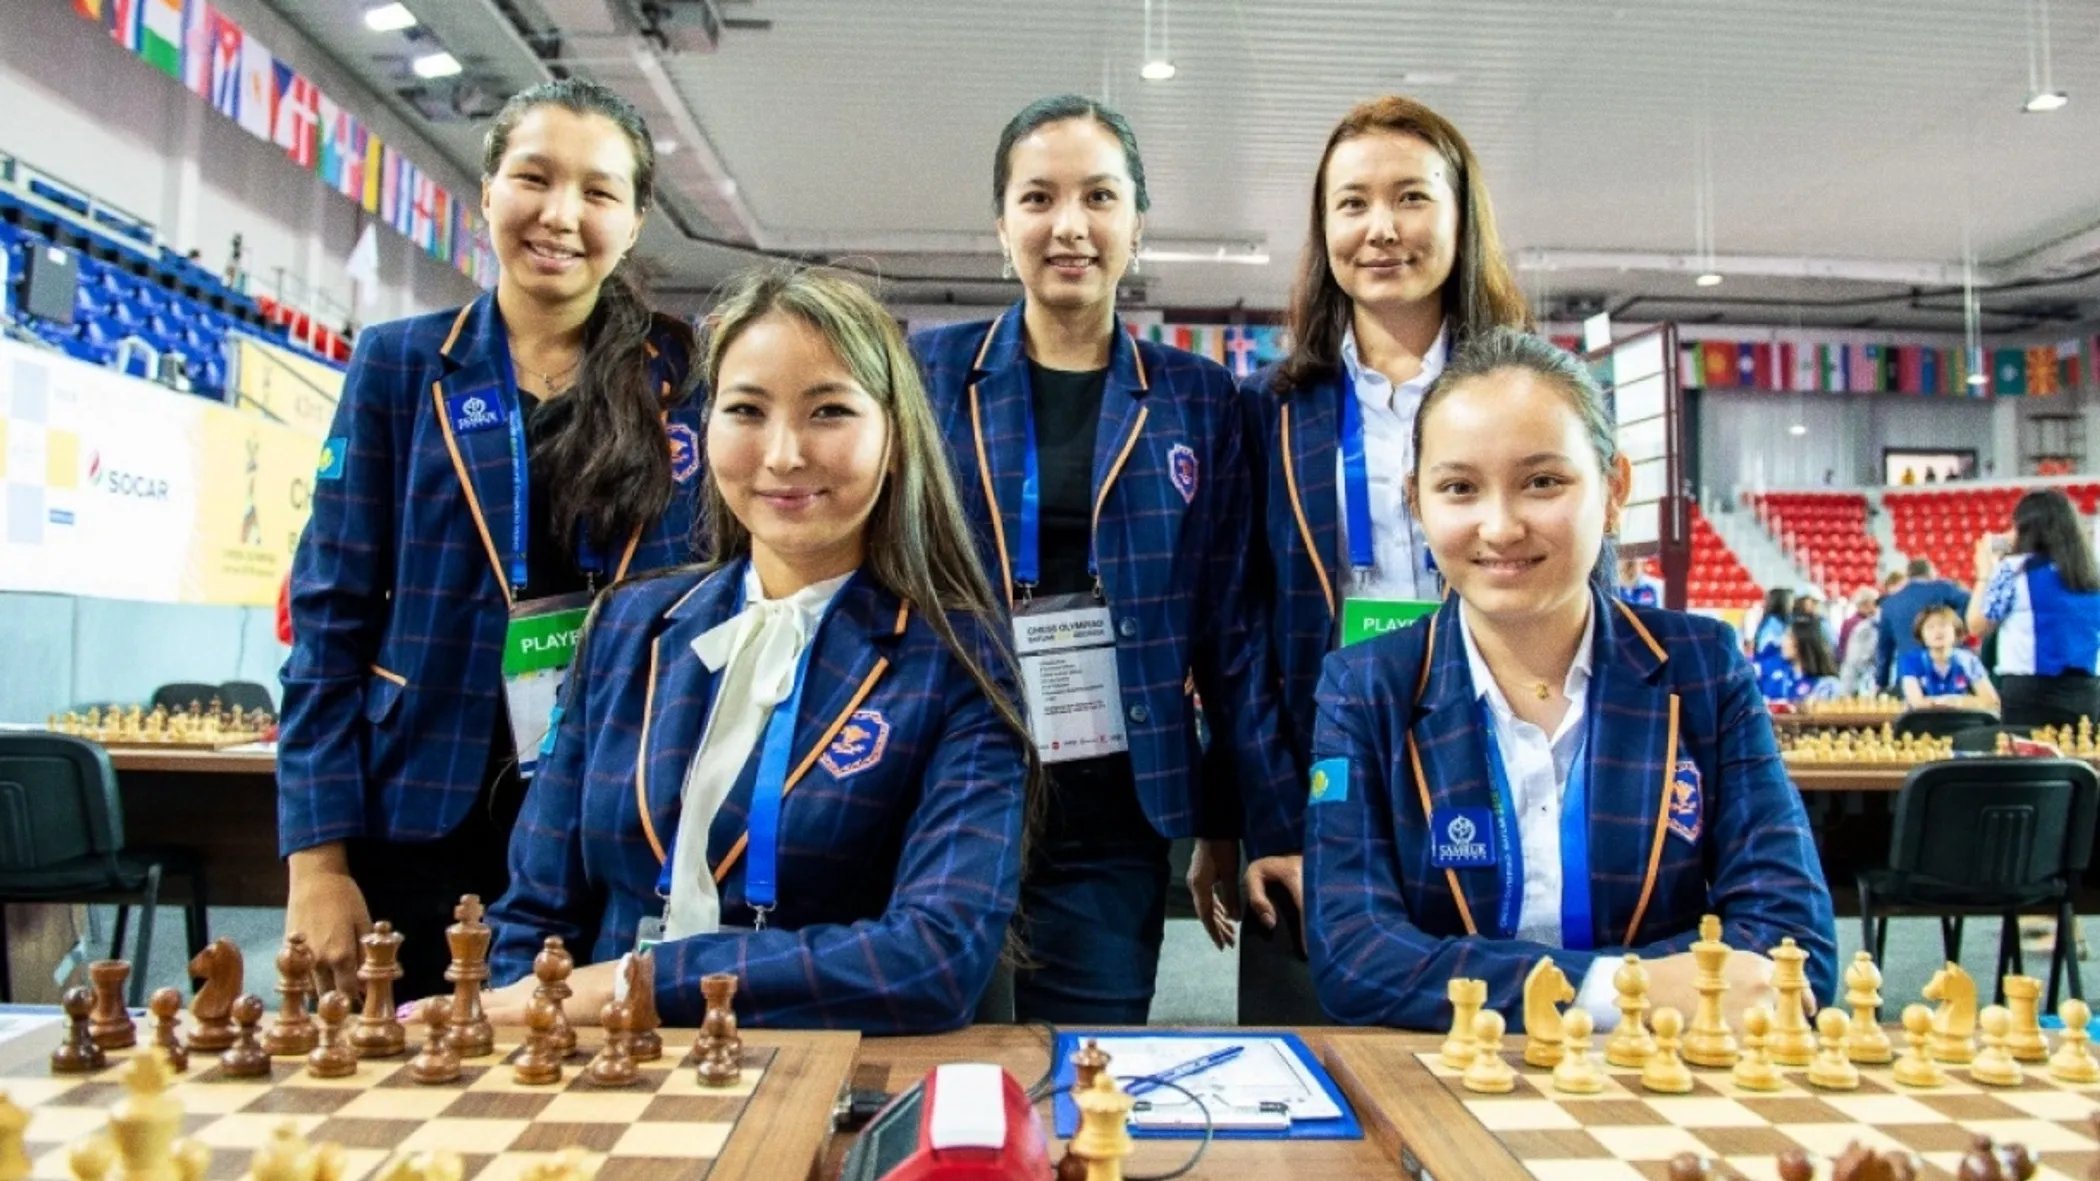 The team at the 43rd Chess Olympiad in 2018 (image source: FIDE)